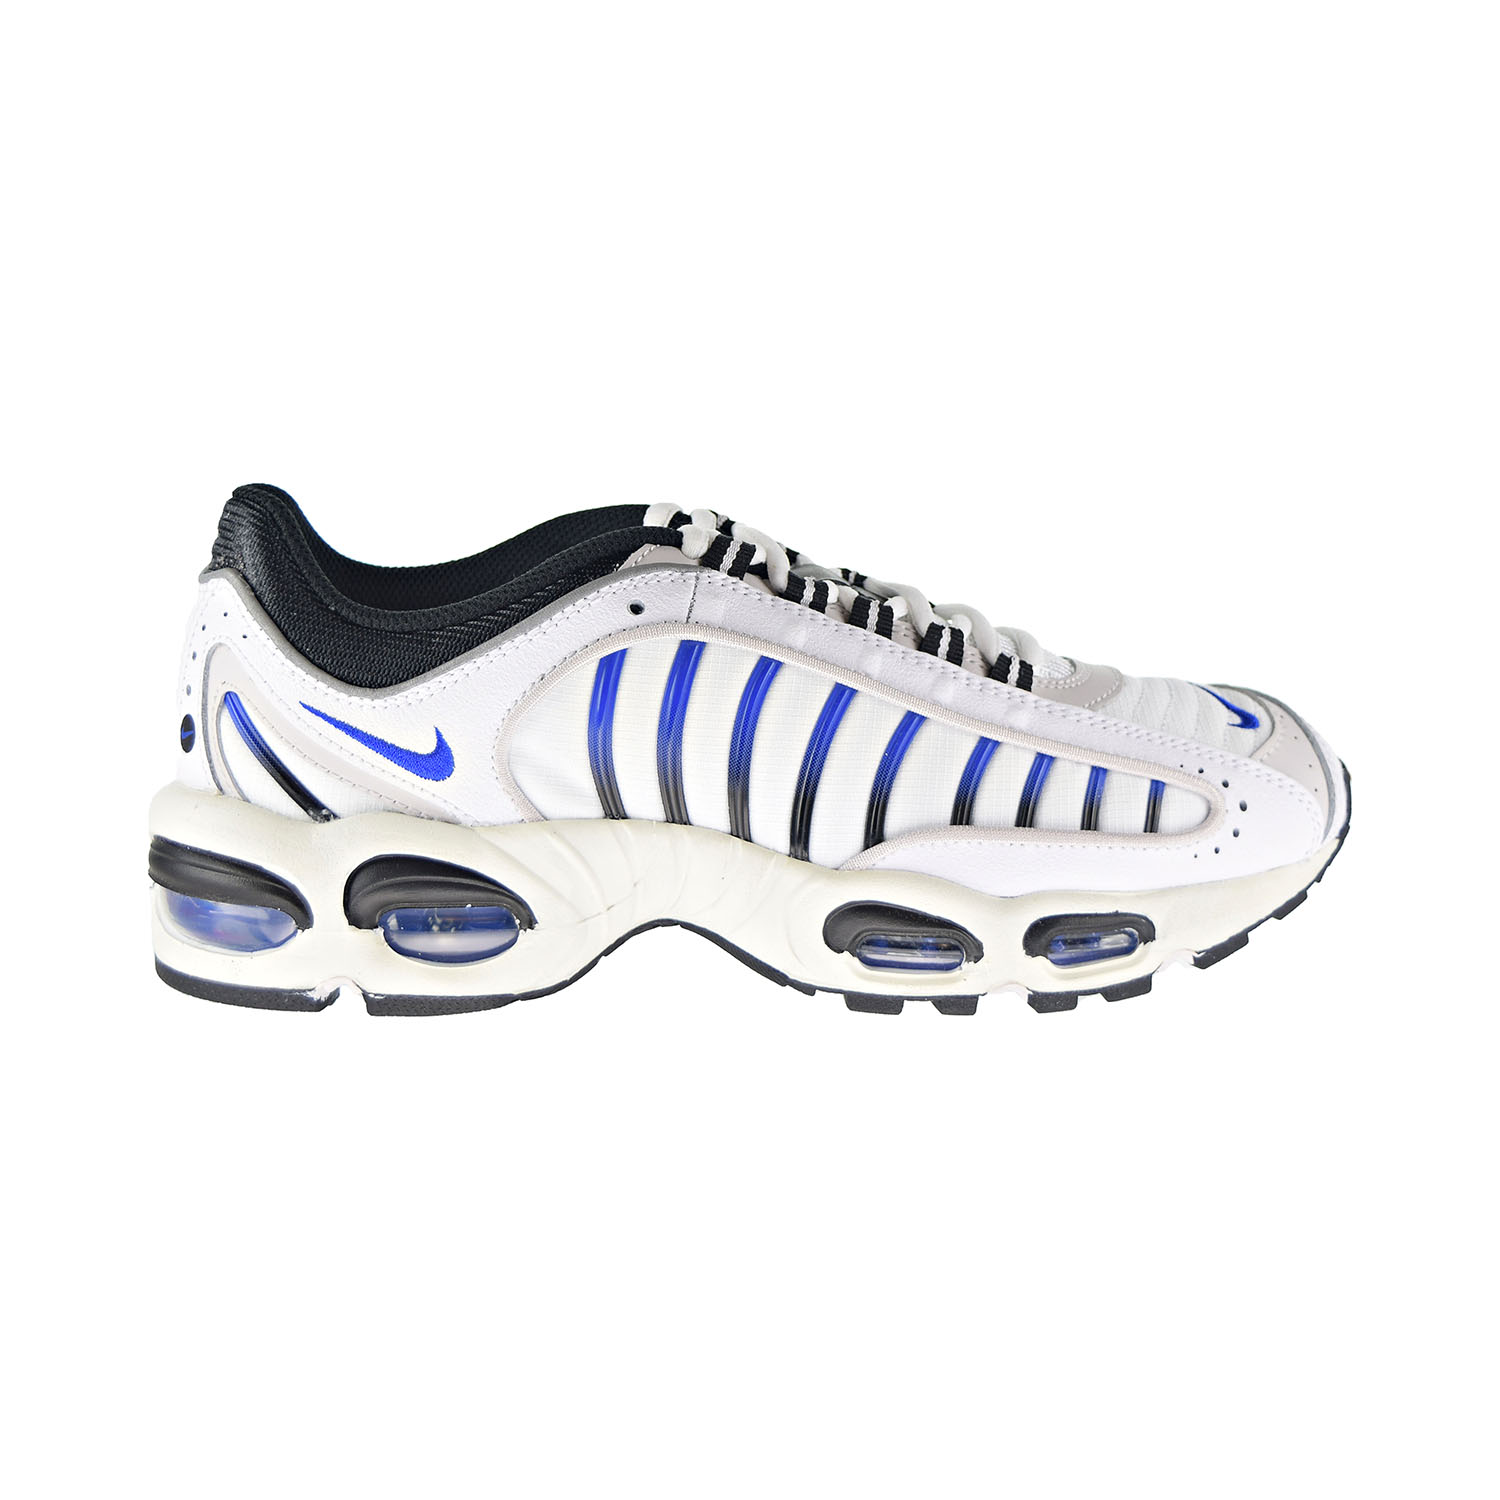 Nike Air Max Tailwind IV Men's Shoes White-Summit White-Vast aq2567-105 - image 1 of 6